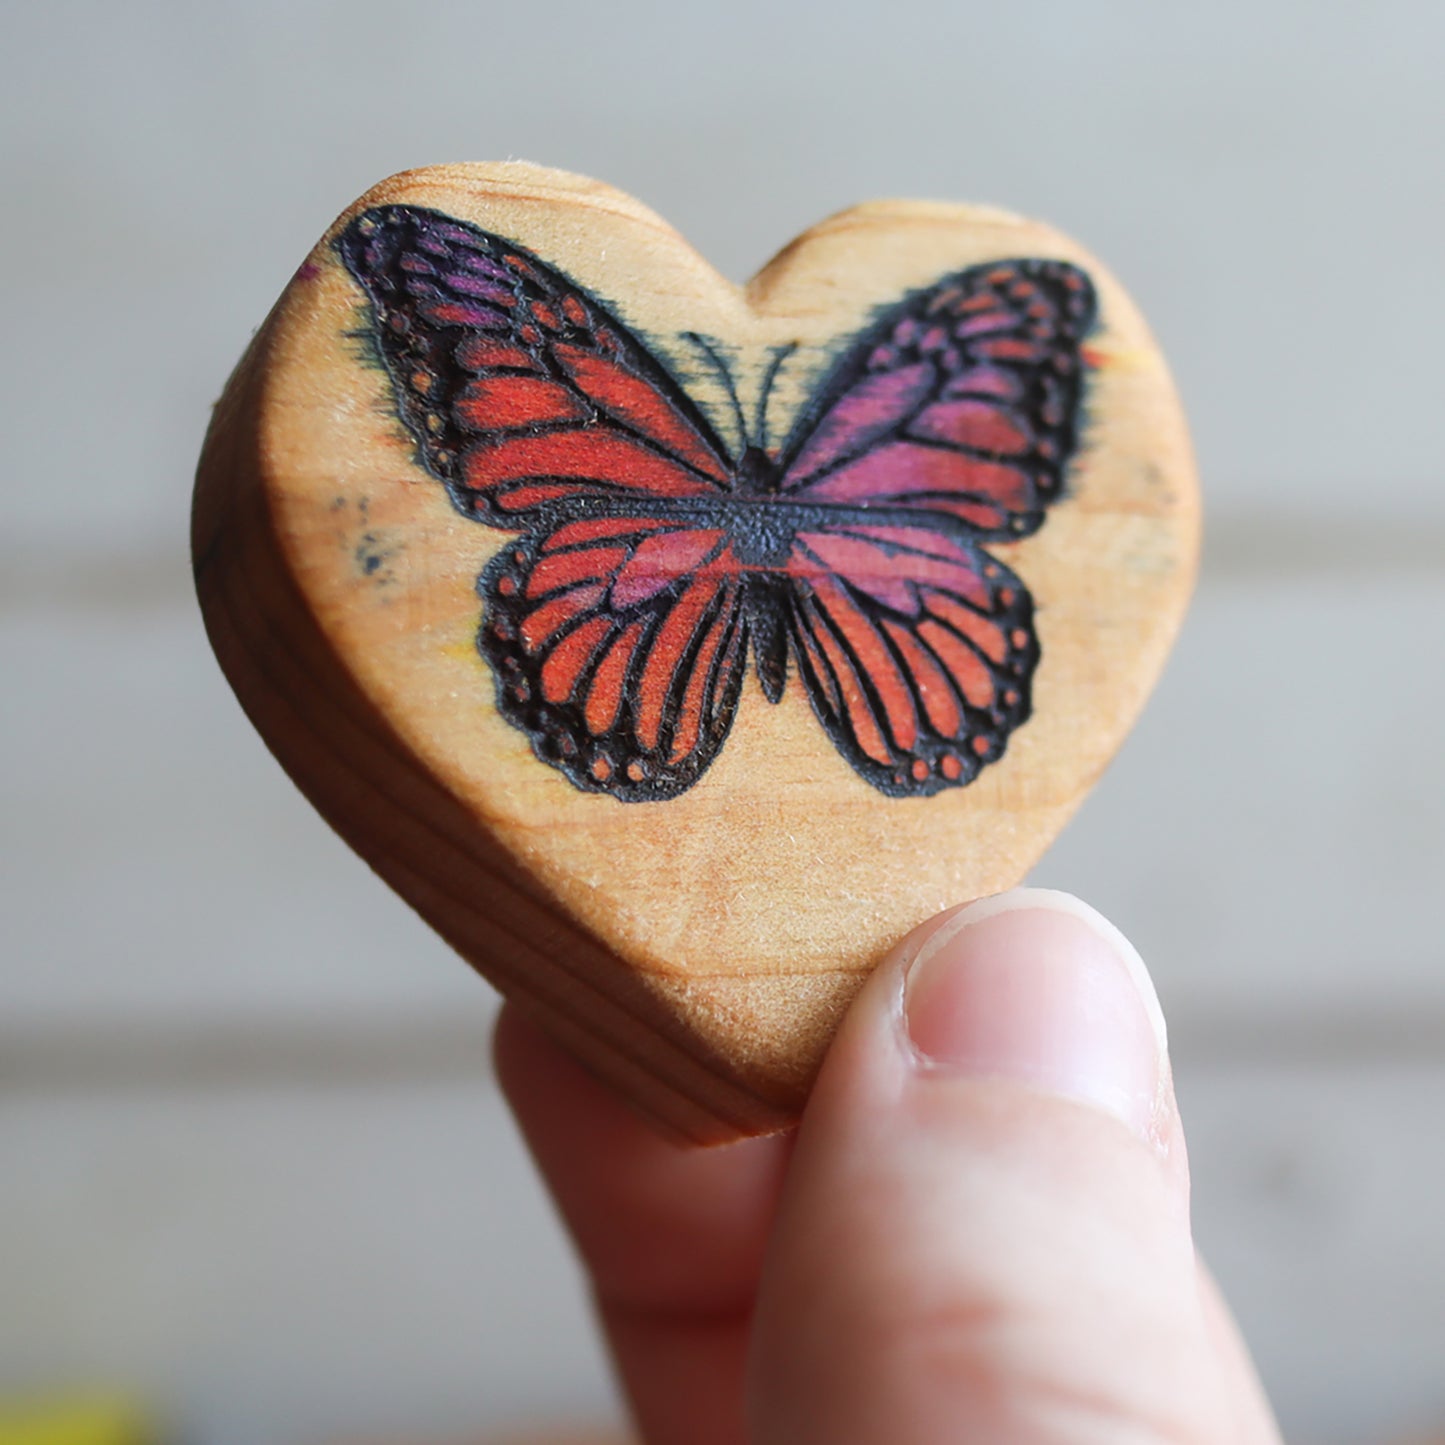 Build-Your-Own Engraved Heart Sets